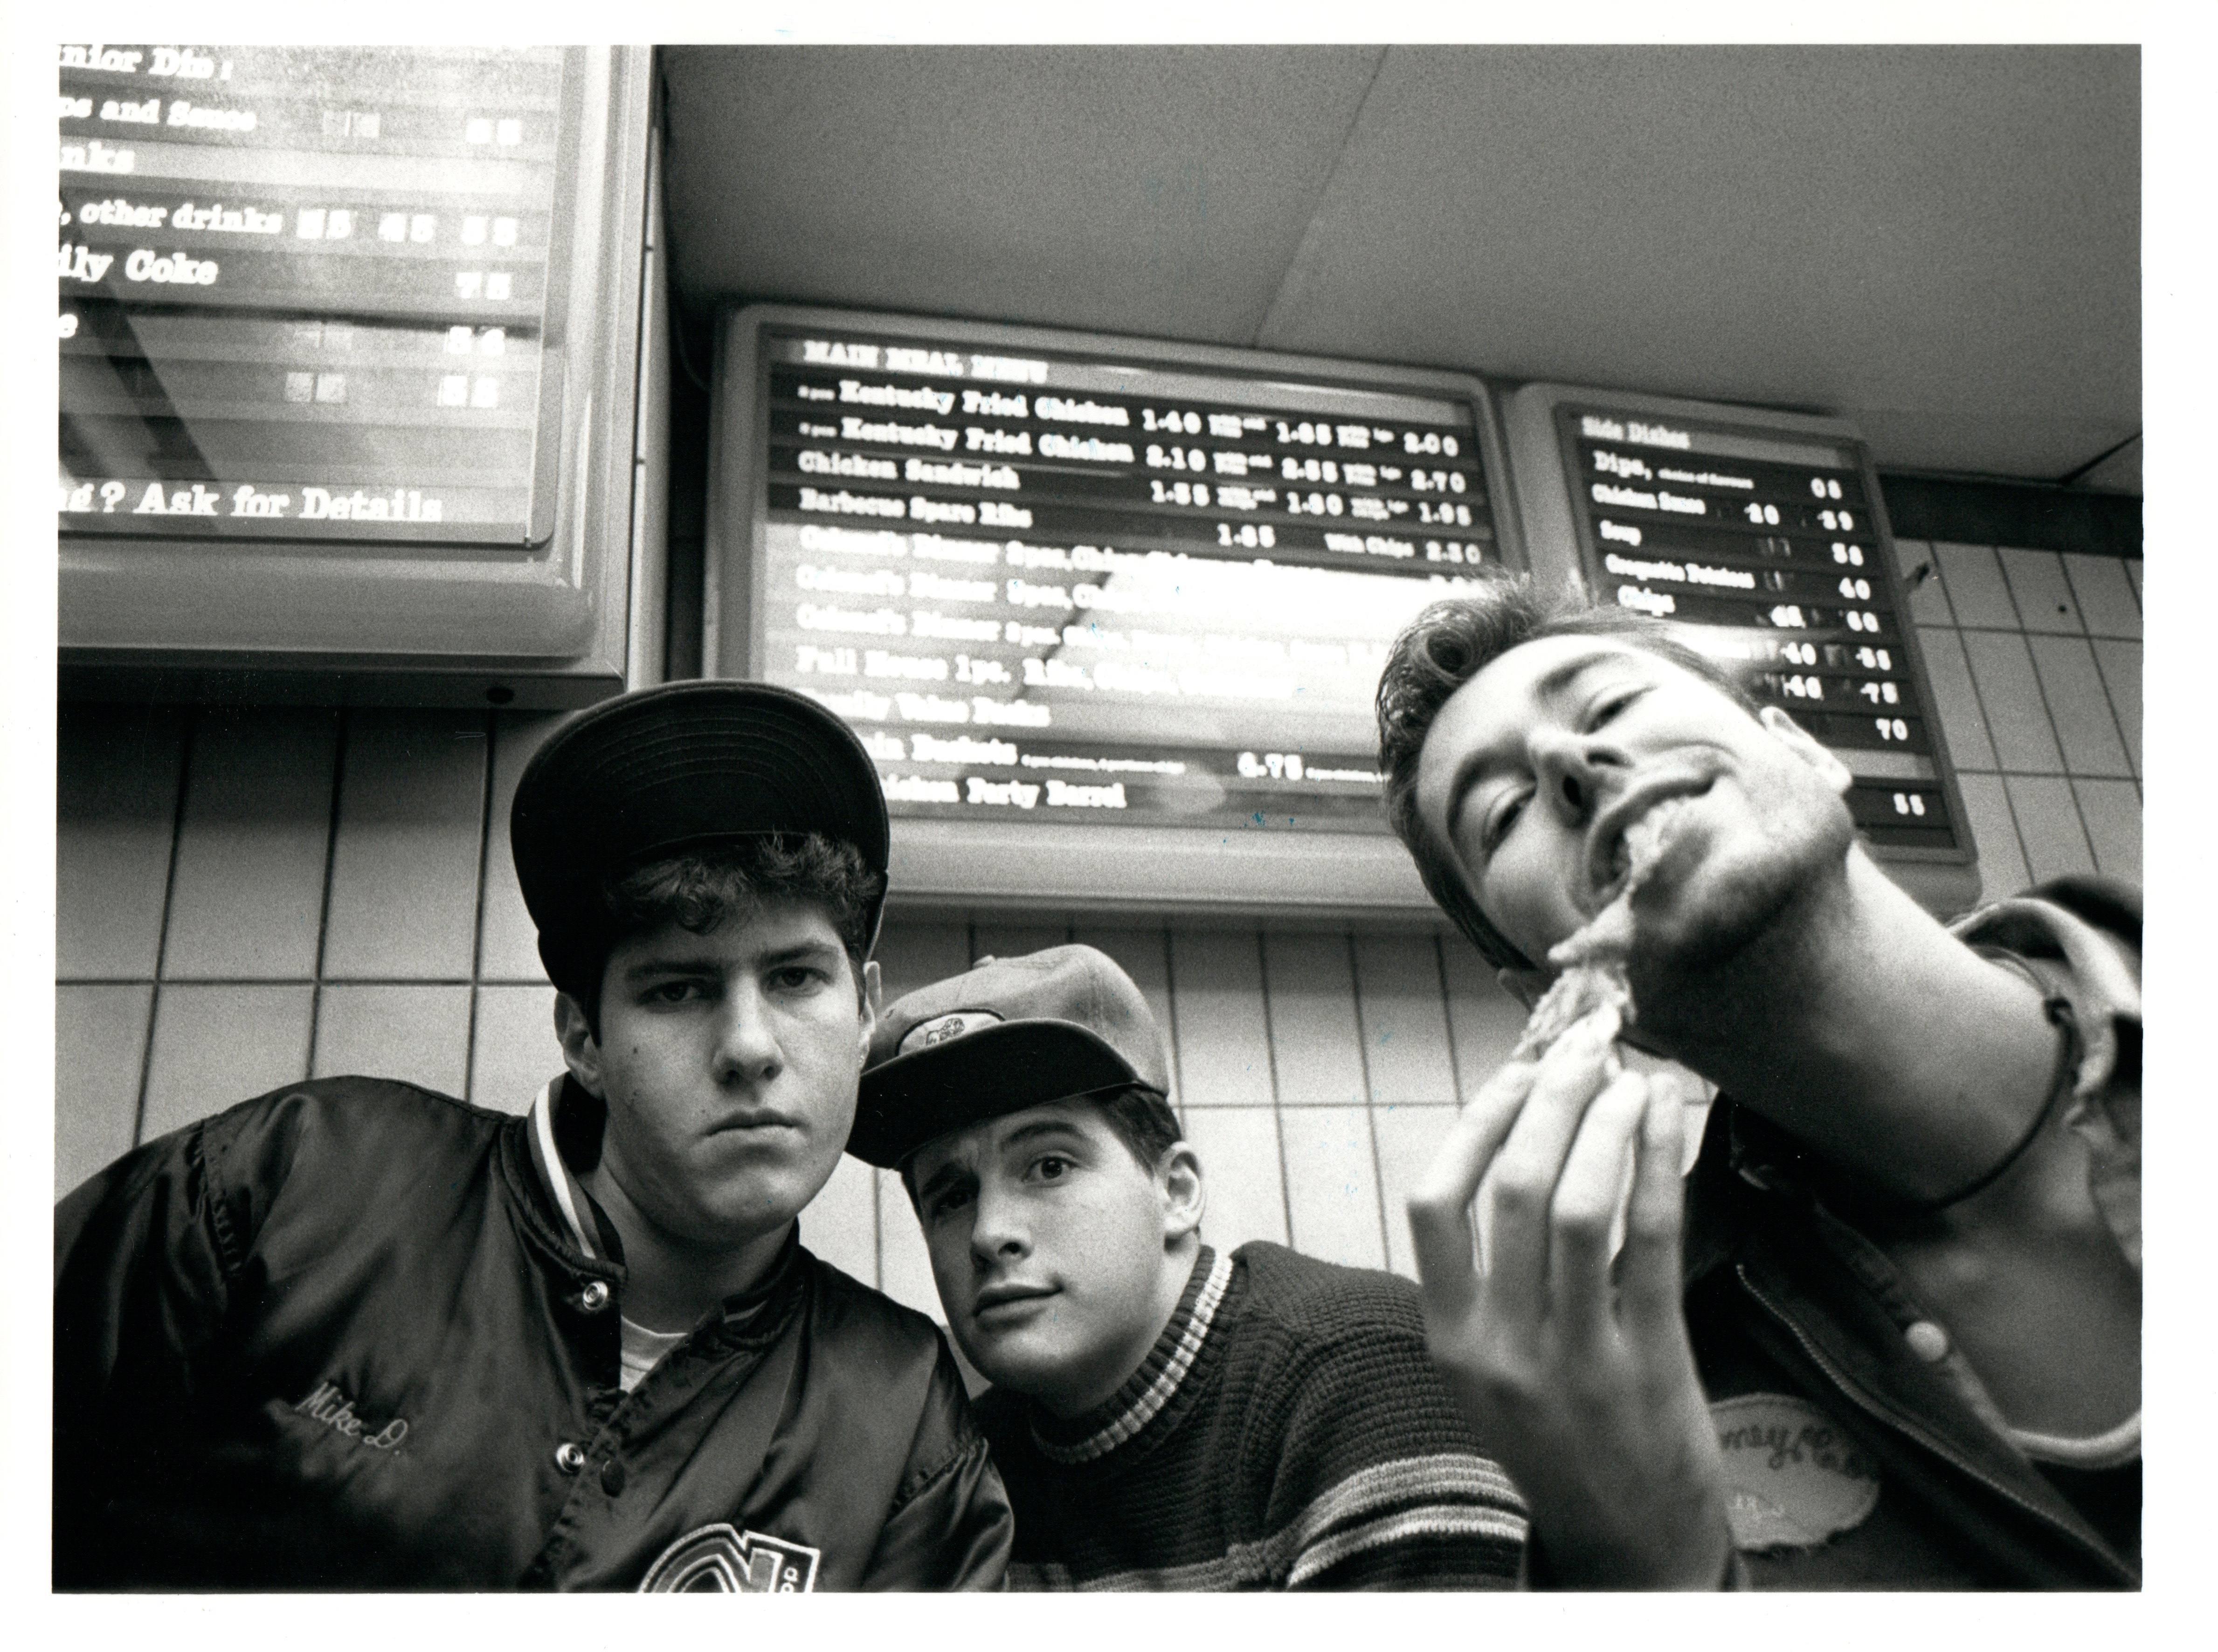 Ronnie Randall Black and White Photograph - Beastie Boys Eating Vintage Original Photograph